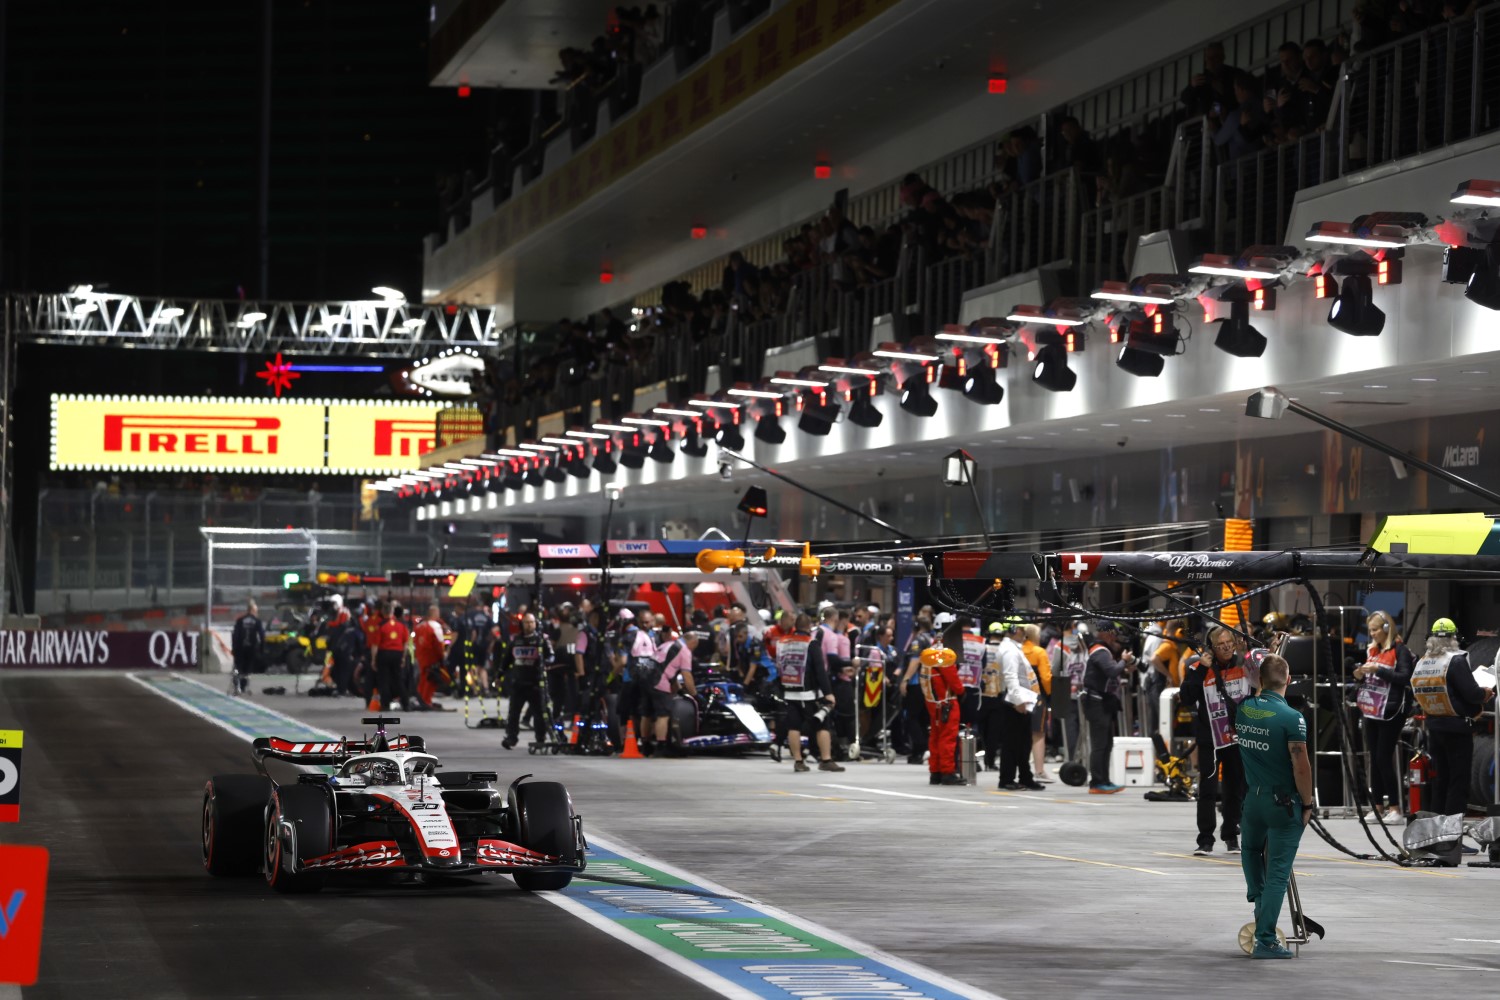 Kevin Magnussen, Haas VF-23, in the pit lane during the Las Vegas GP at Streets of Las Vegas on Friday November 17, 2023, United States of America. (Photo by Glenn Dunbar / LAT Images)